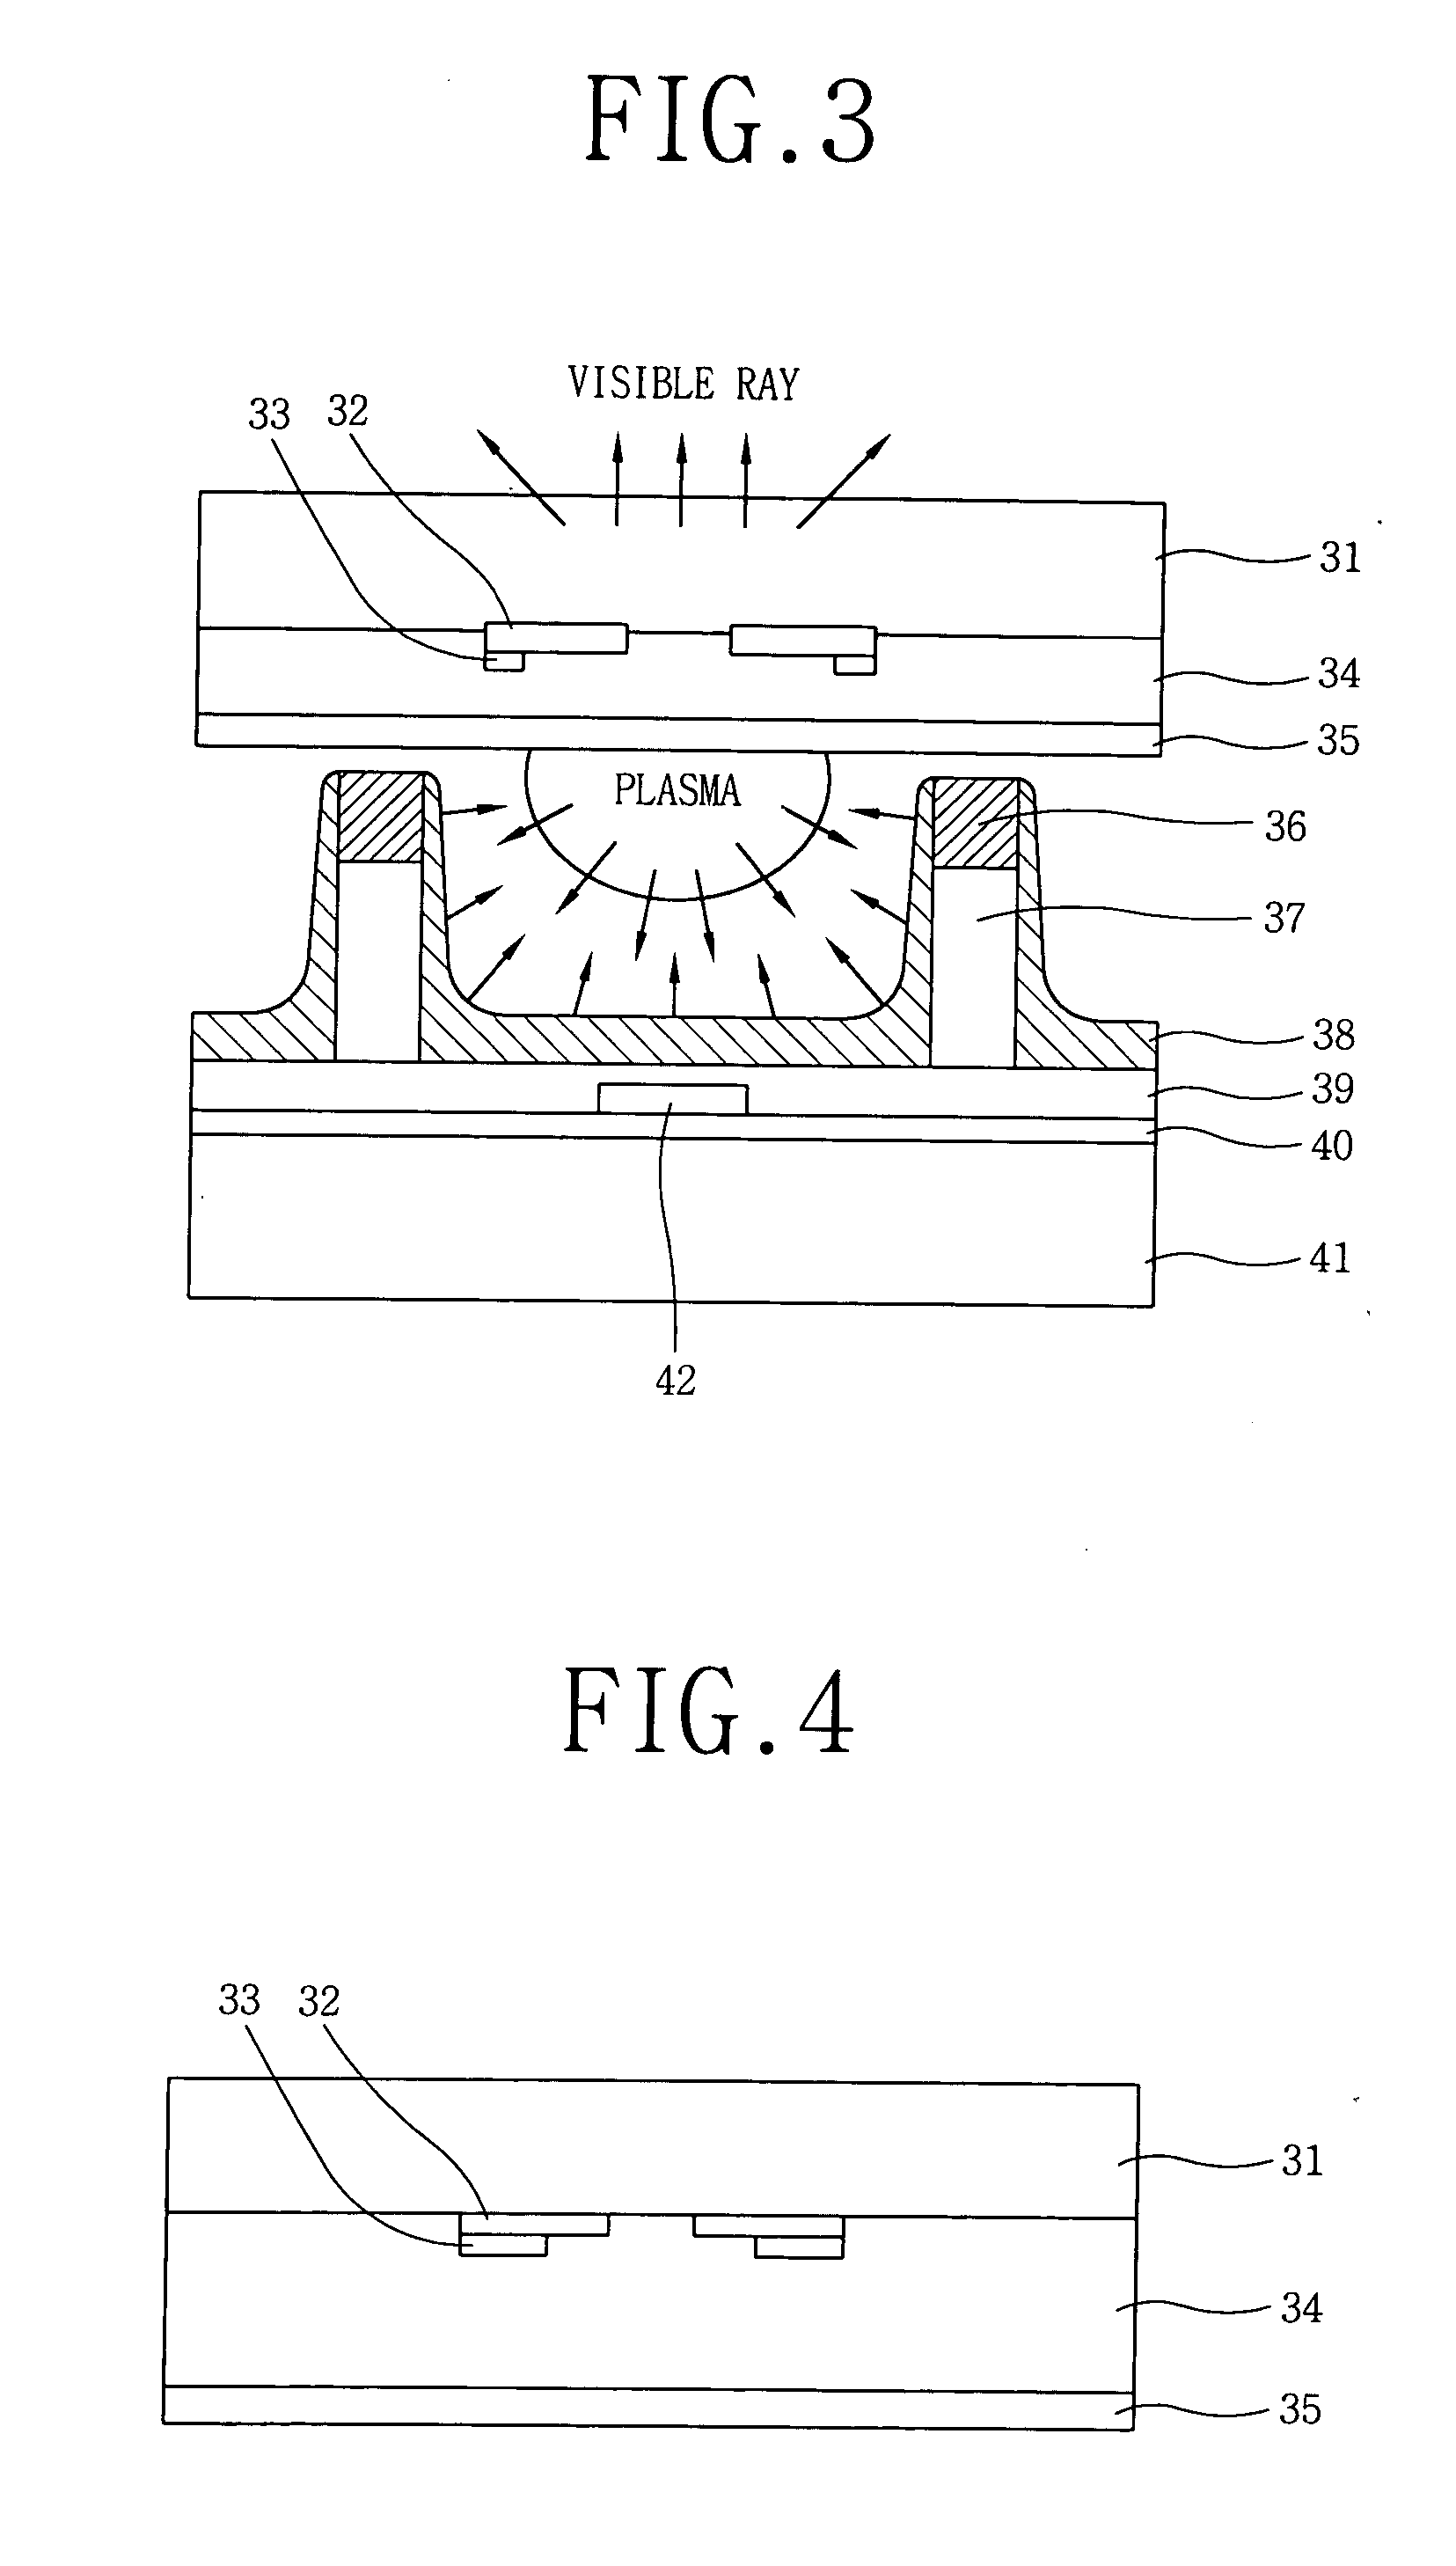 Composition of dielectric for plasma display panel